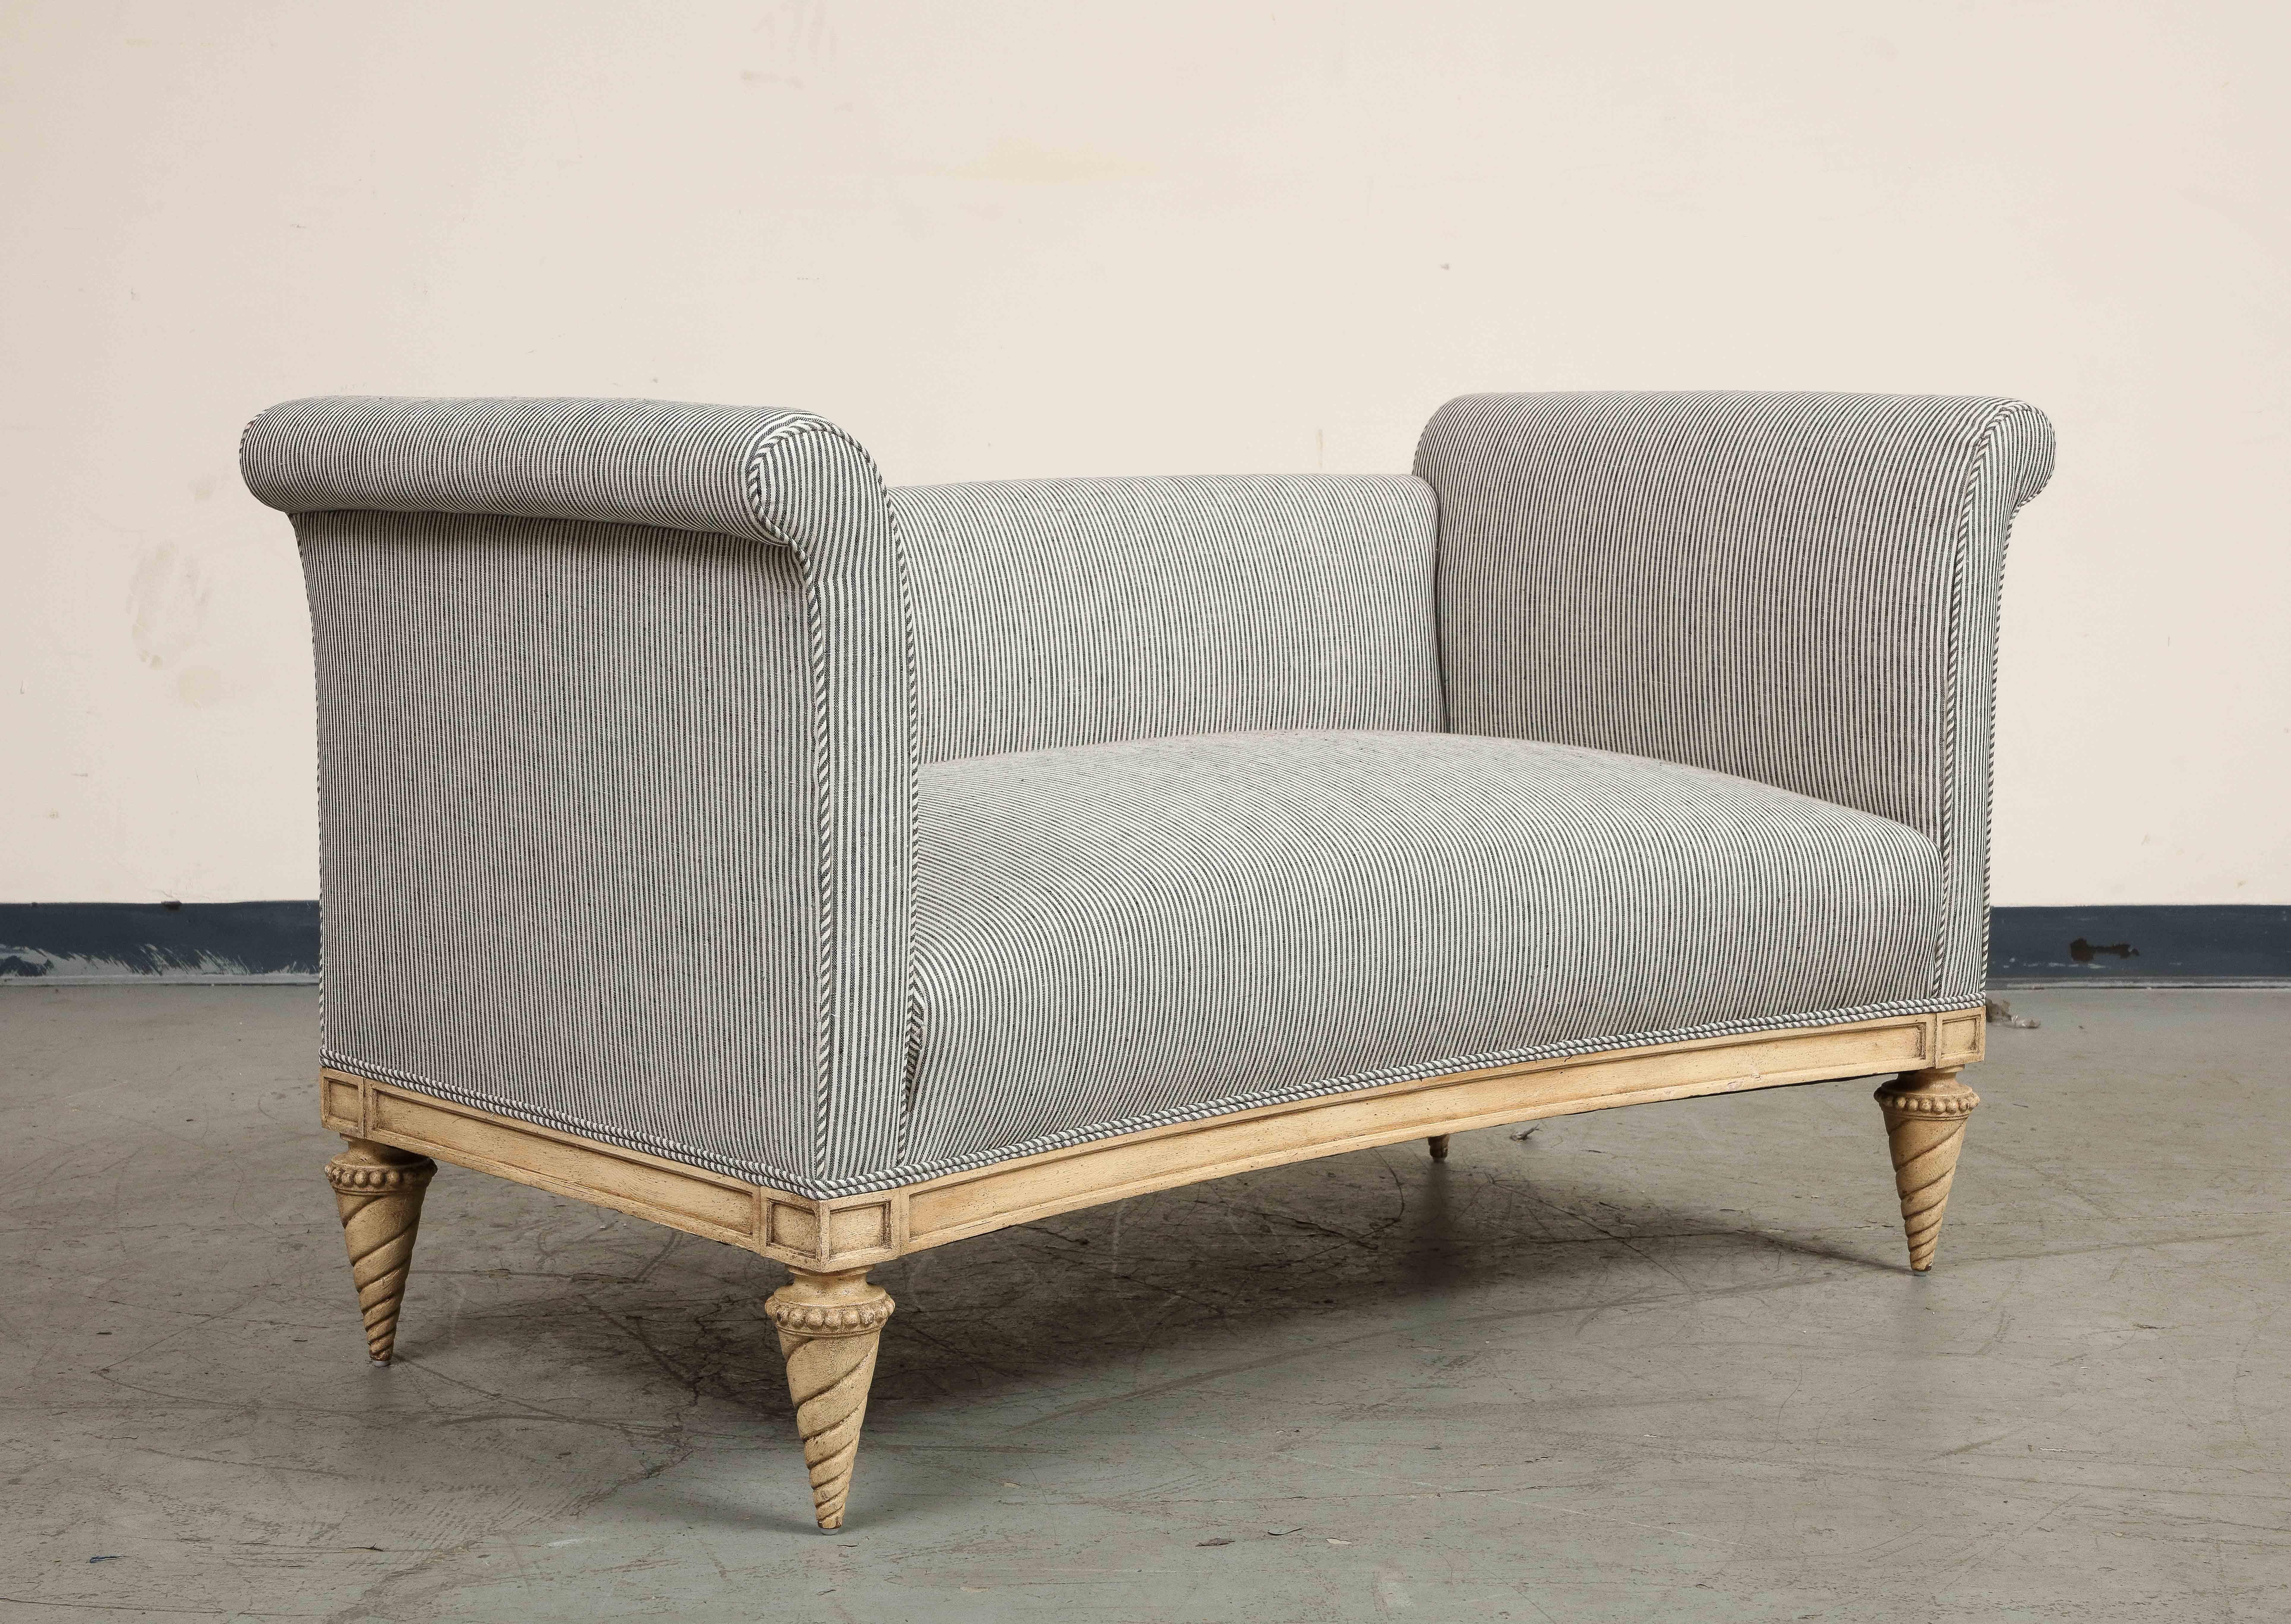 Midcentury Louis XVI style French settee in the manner of Maison Jansen, circa 1940. Elegant profile with rolled arms, carved conical feet, and fully welted new upholstery. 

Fully restored and recovered in Schumacher Wesley Ticking Stripe fabric in